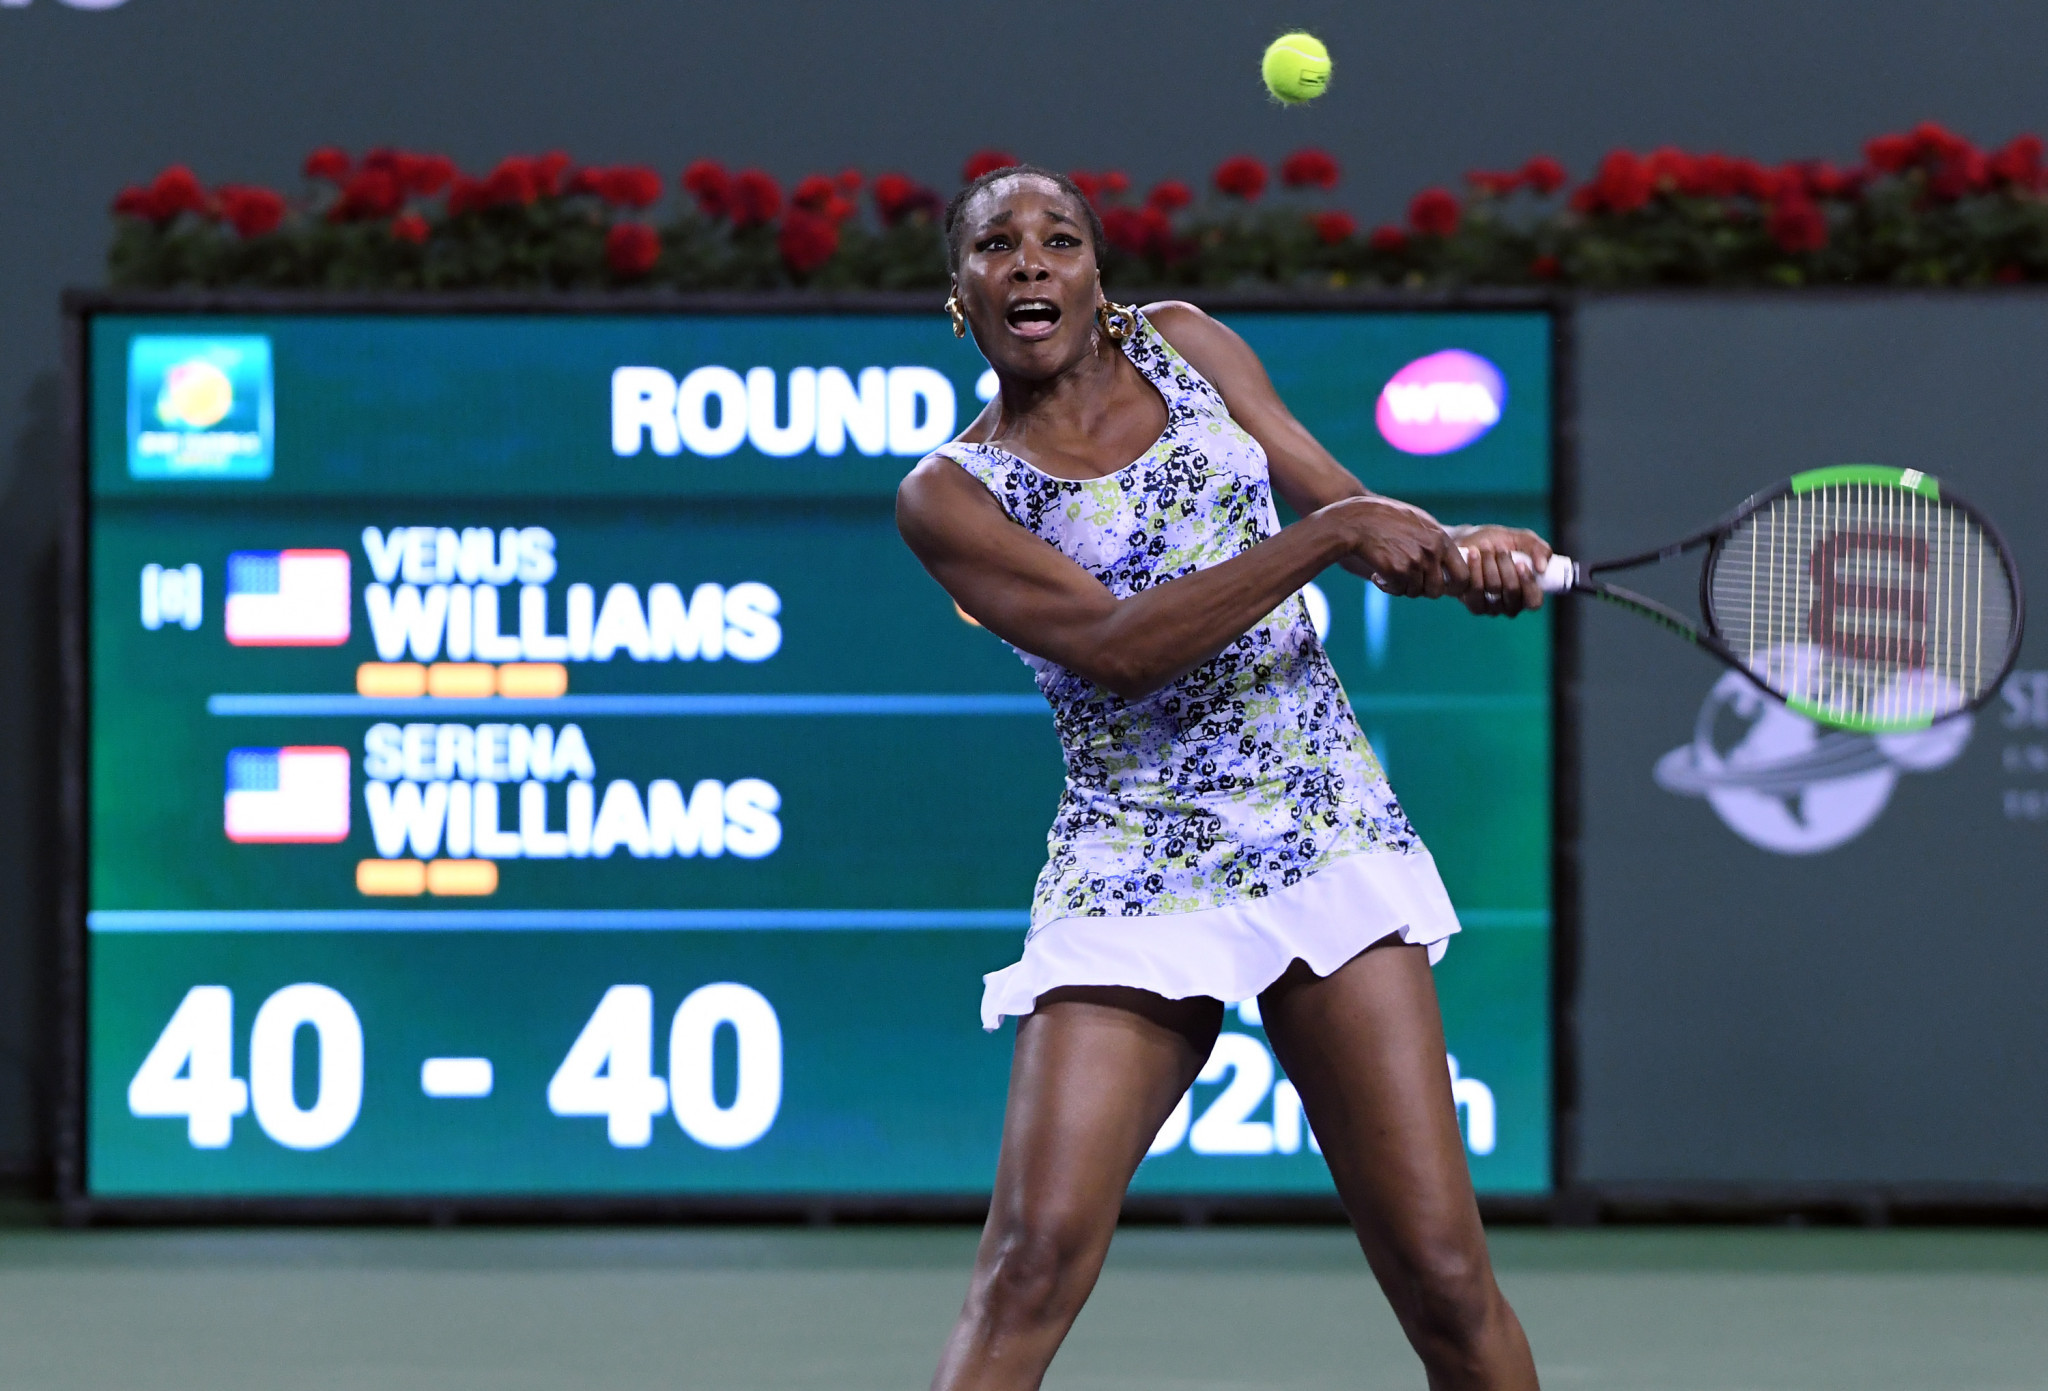 America's Venus Williams overcame her sister Serena at Indian Wells ©Getty Images